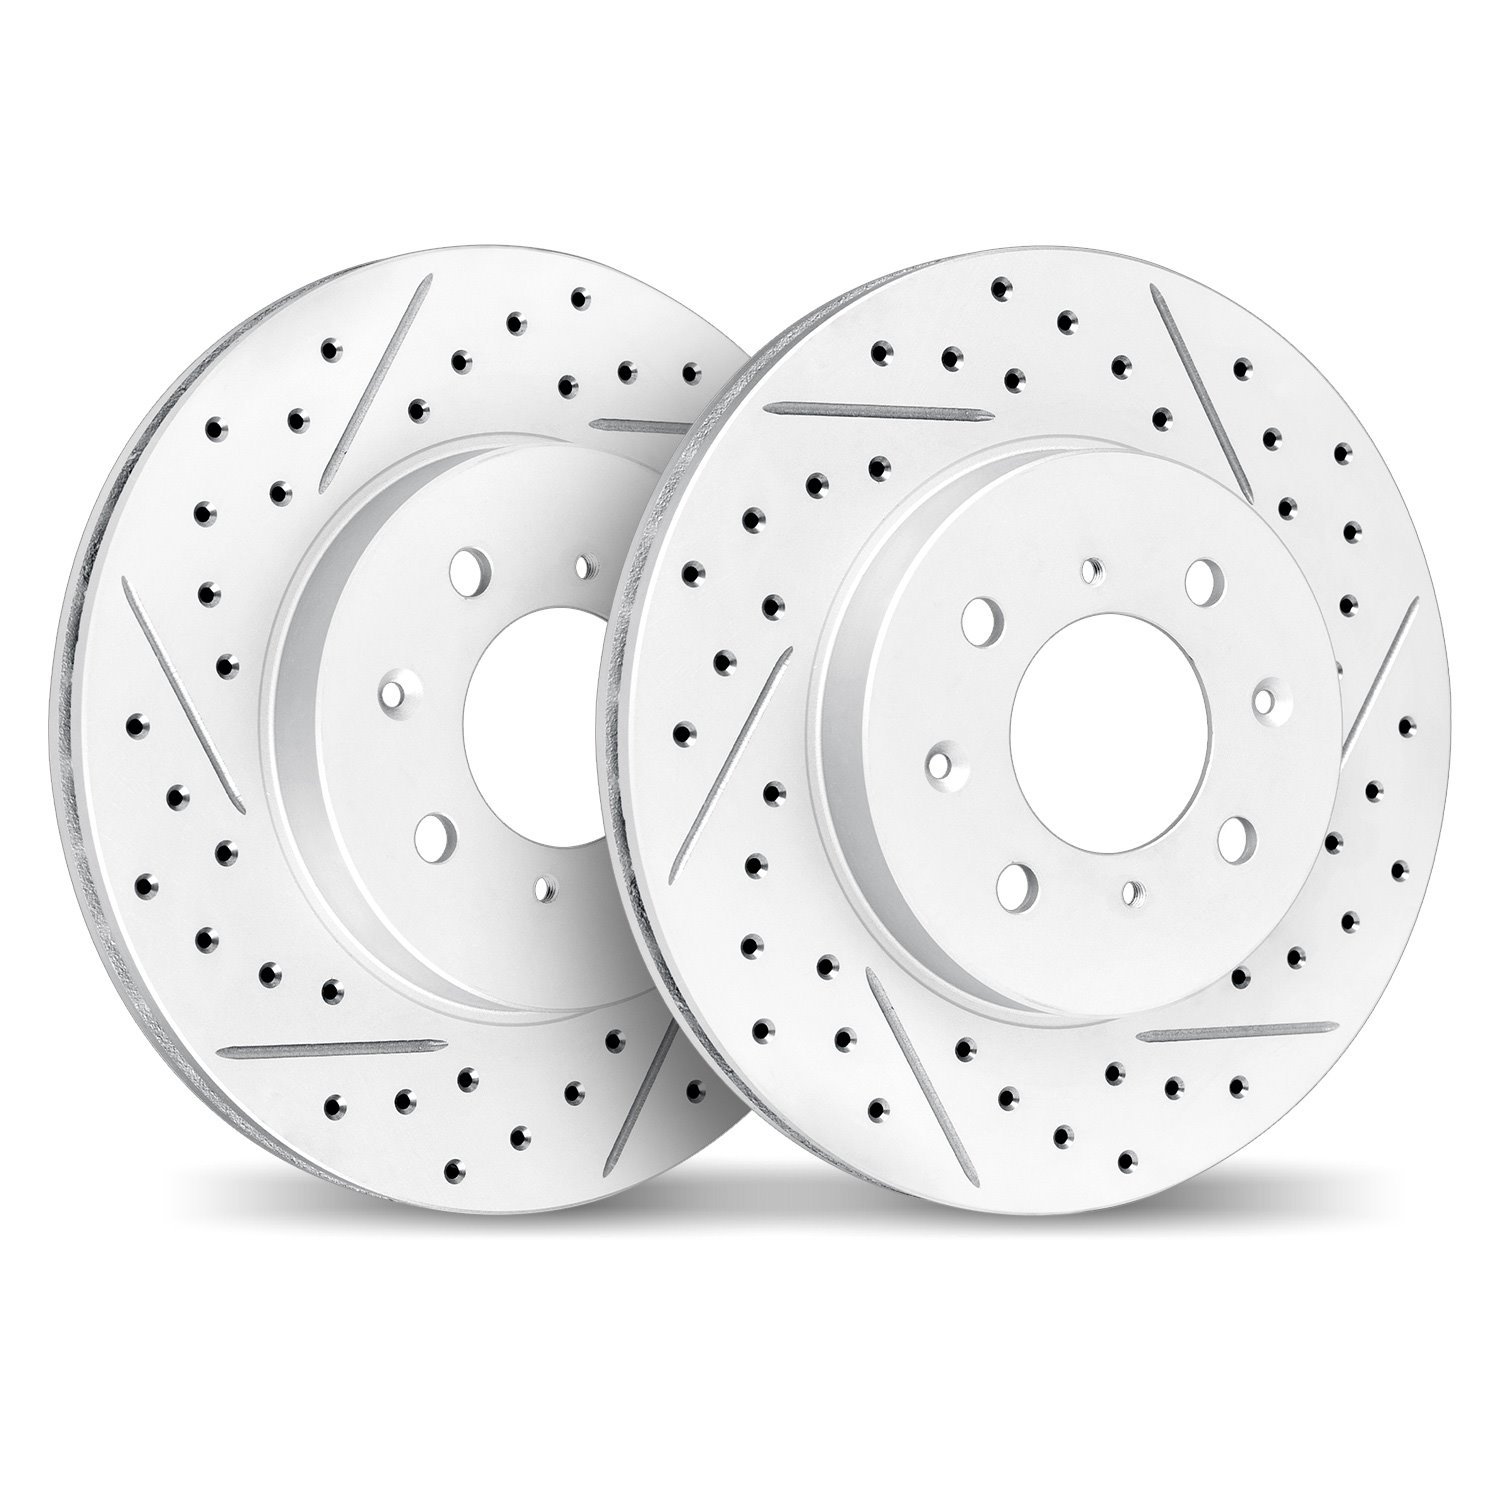 2002-27008 Geoperformance Drilled/Slotted Brake Rotors, 2000-2004 Volvo, Position: Front